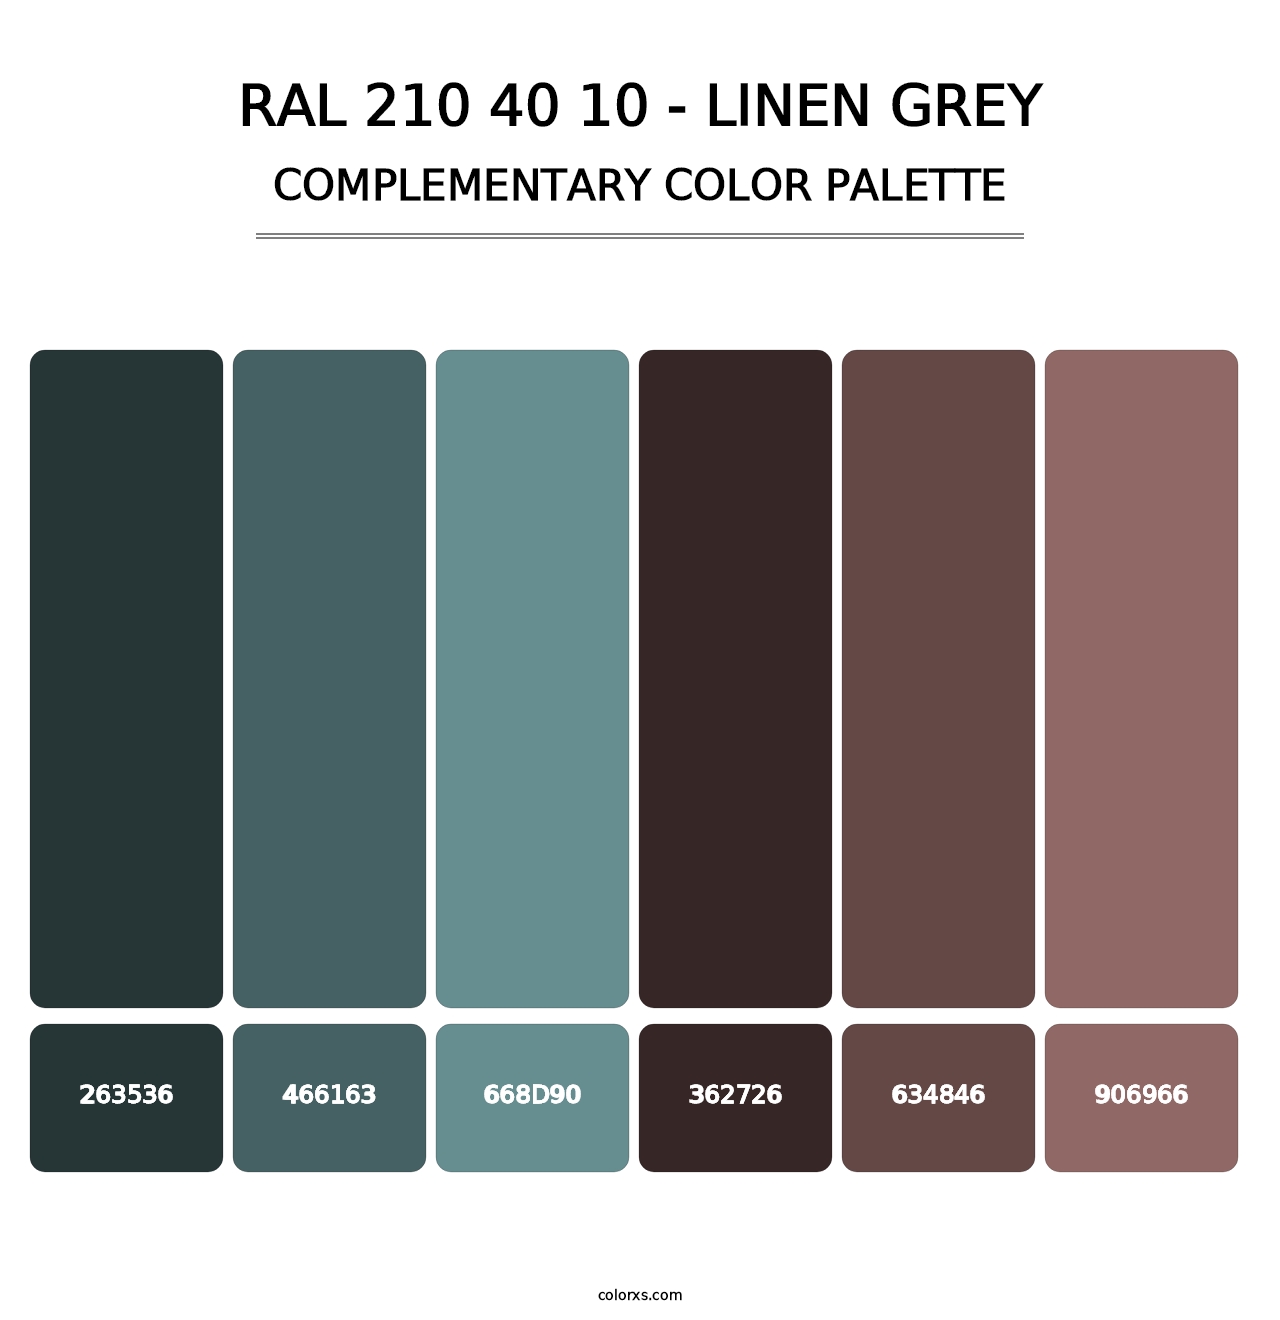 RAL 210 40 10 - Linen Grey - Complementary Color Palette